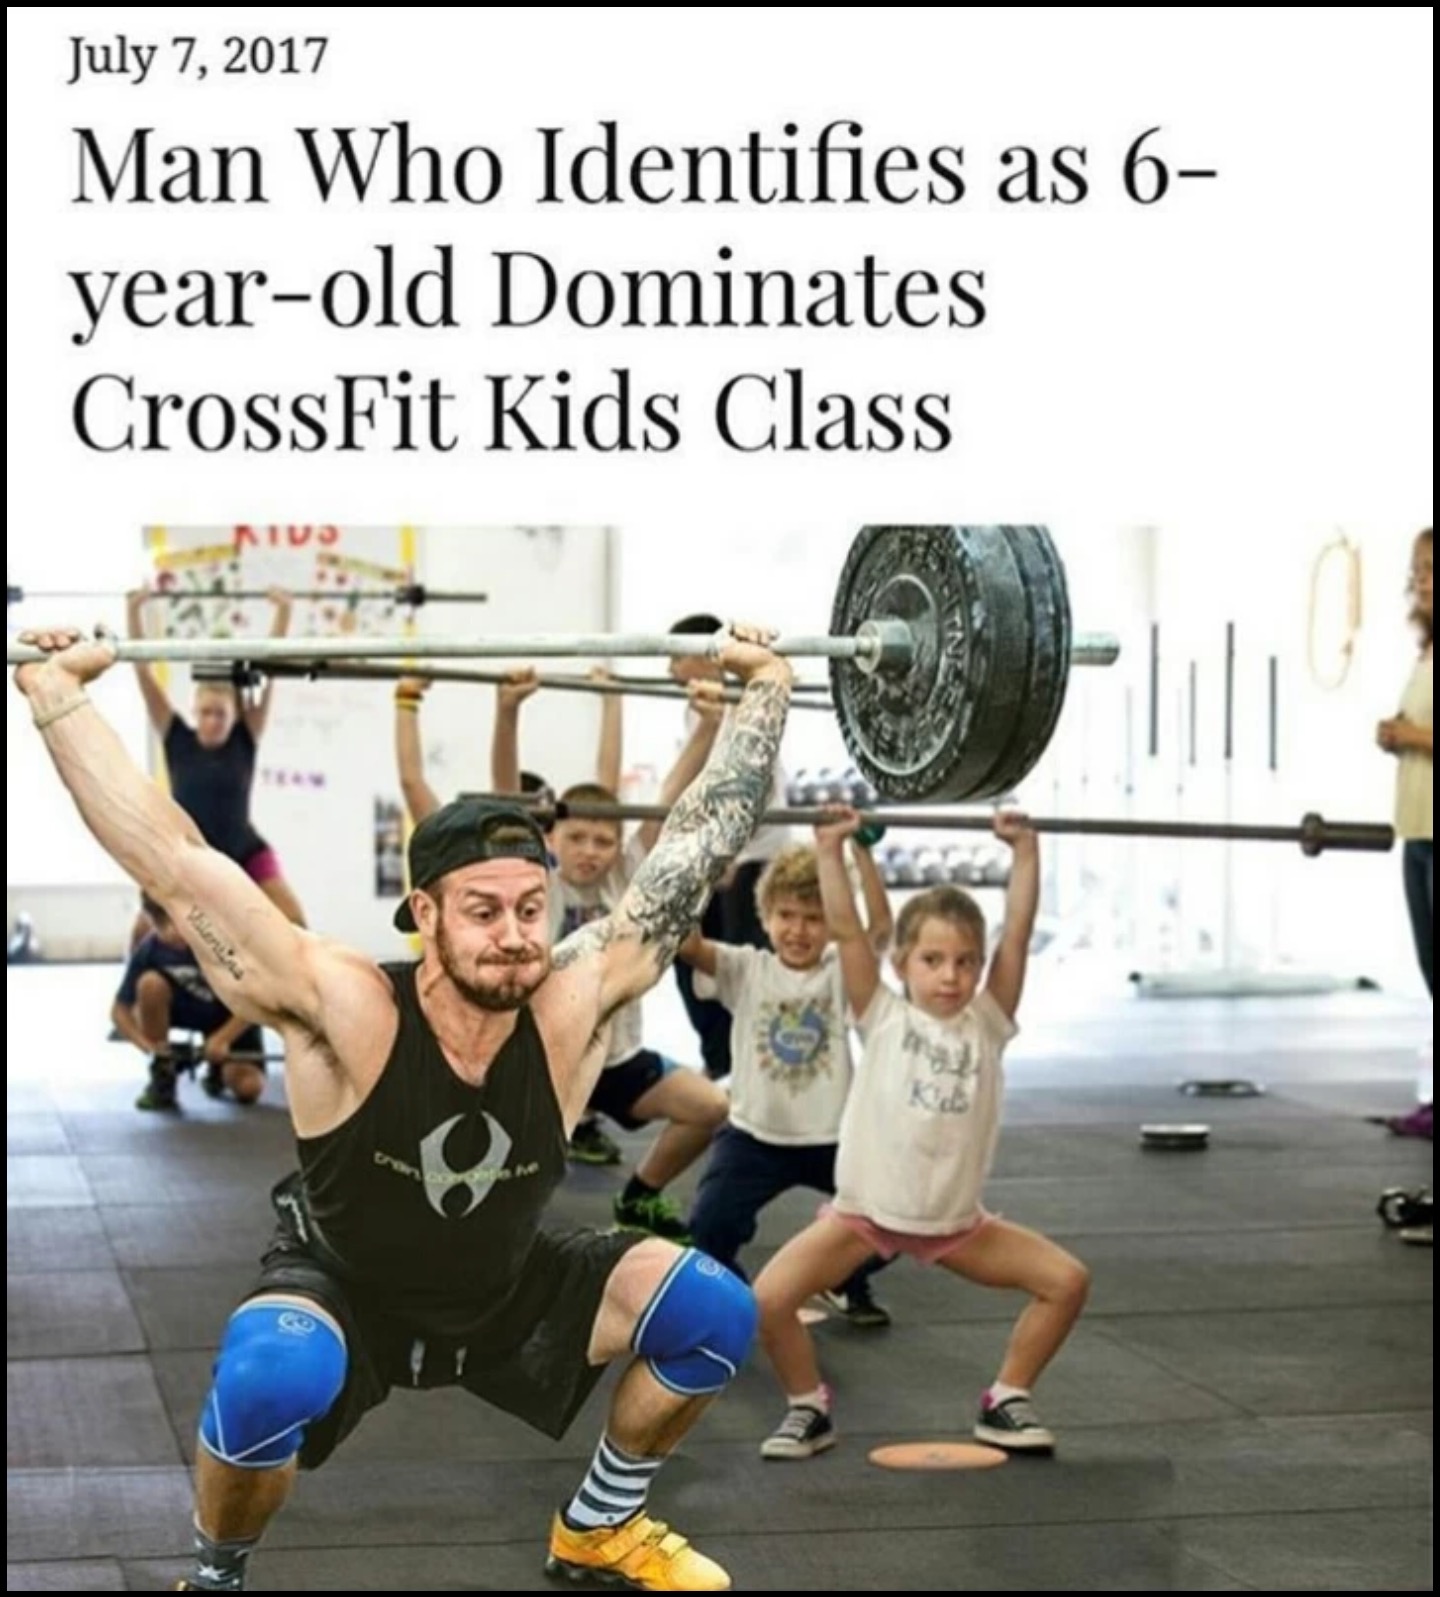 Funny meme of man who identifies as 6 year old dominating cross fit kids class.